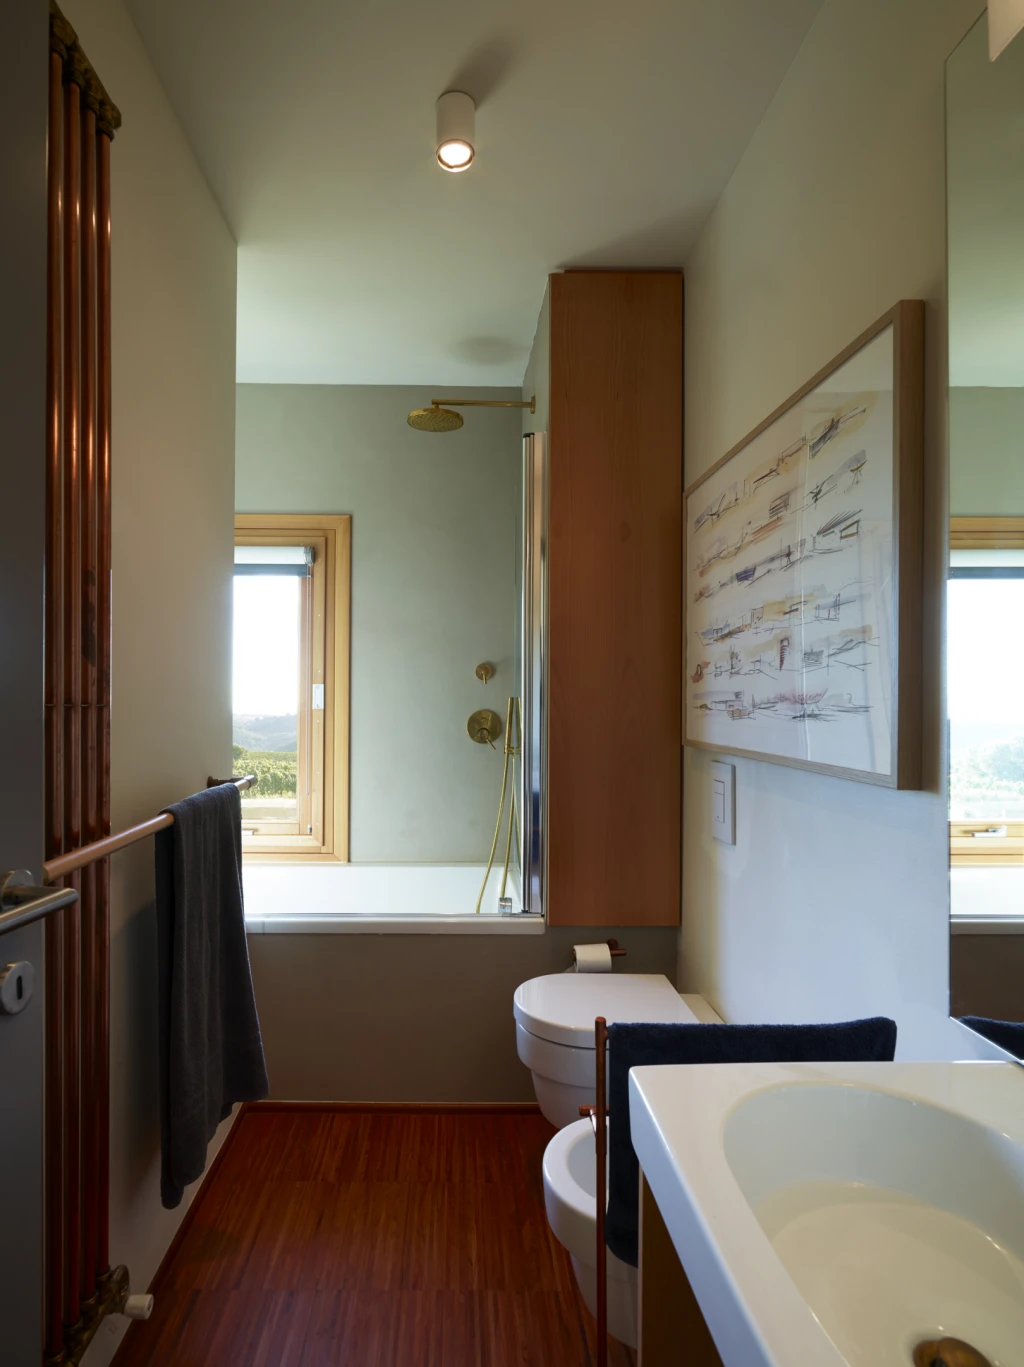 Stylish and comfortable bathroom.  The house is situated on the Marrema coast